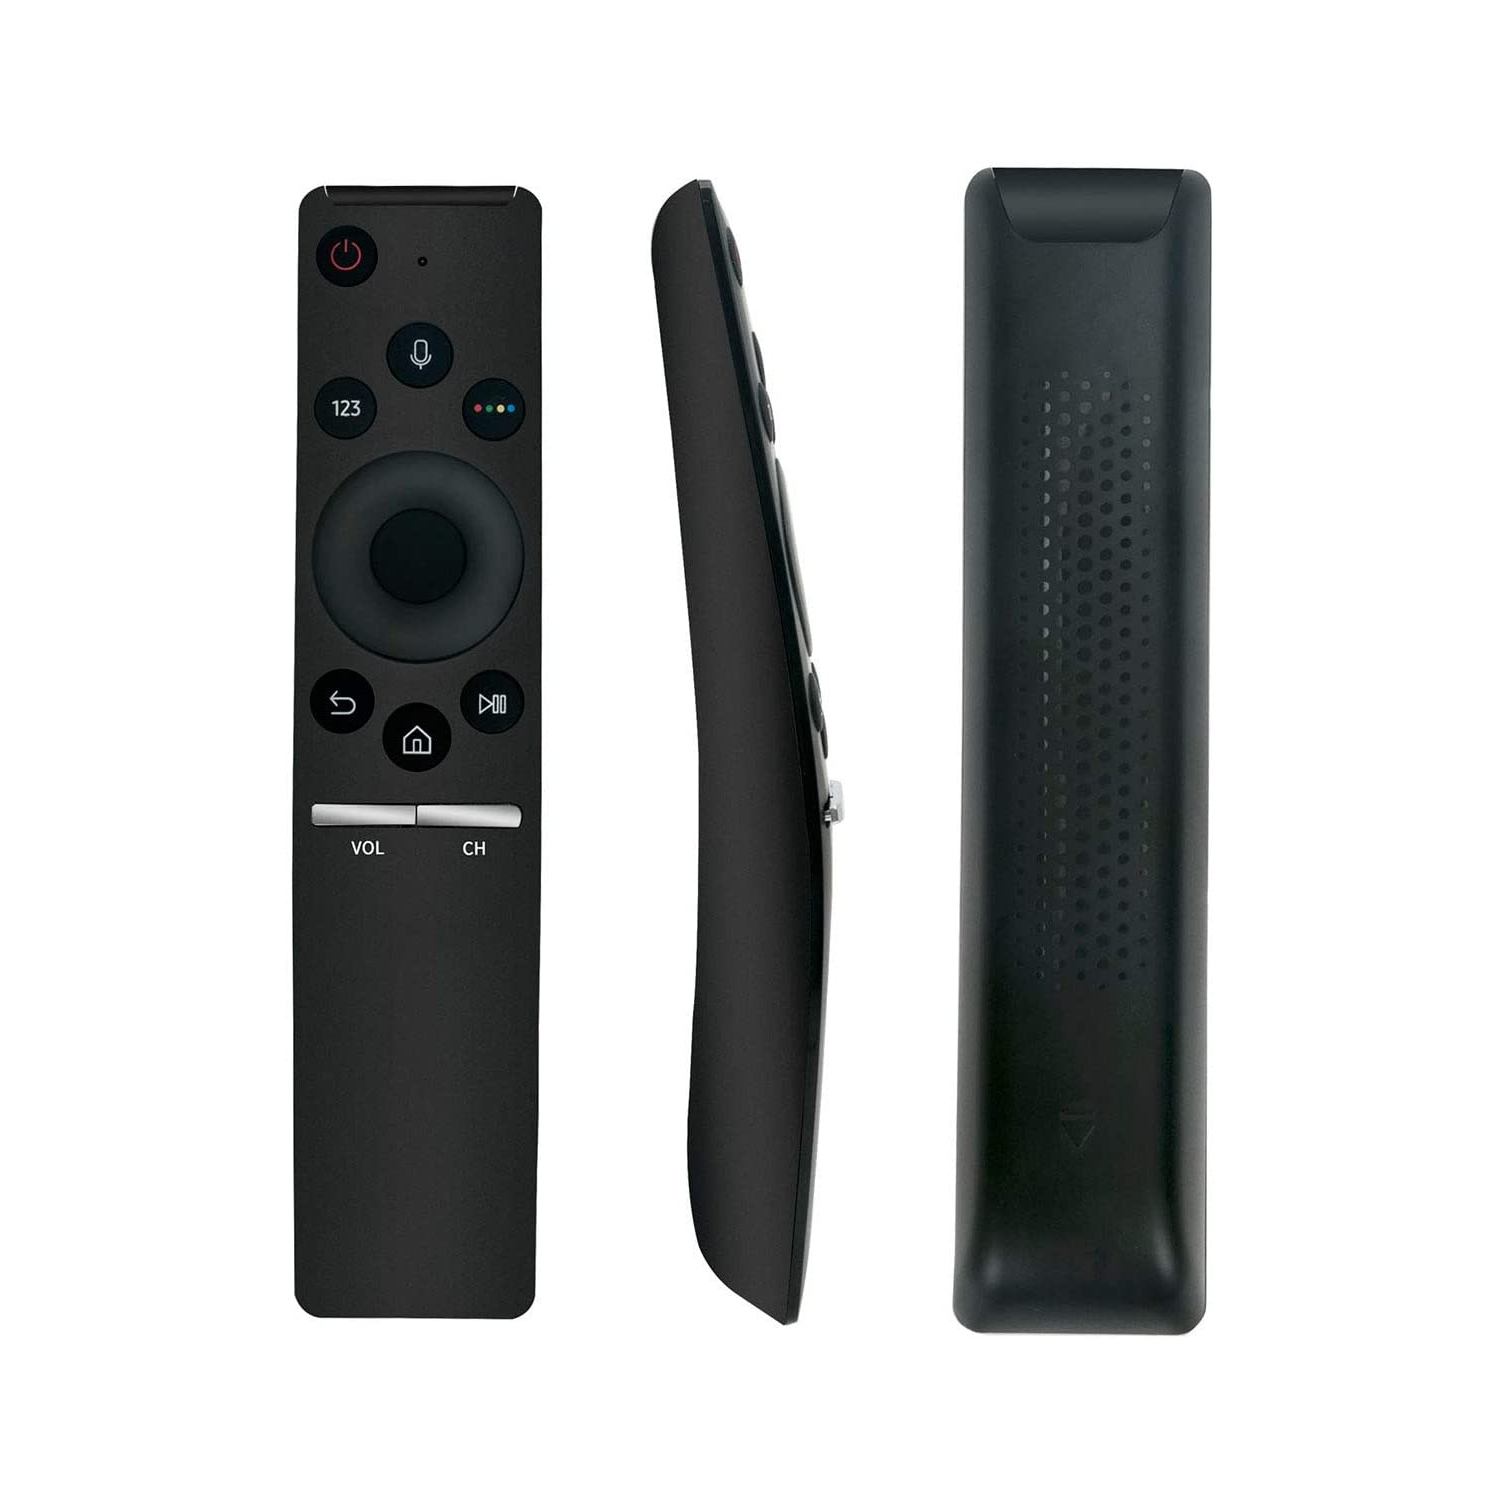 BN59-01266A Replacement Voice Remote Control Applicable for Samsung TV UN50MU6300F UN65MU7000F UN65MU8000F UN65MU9000F